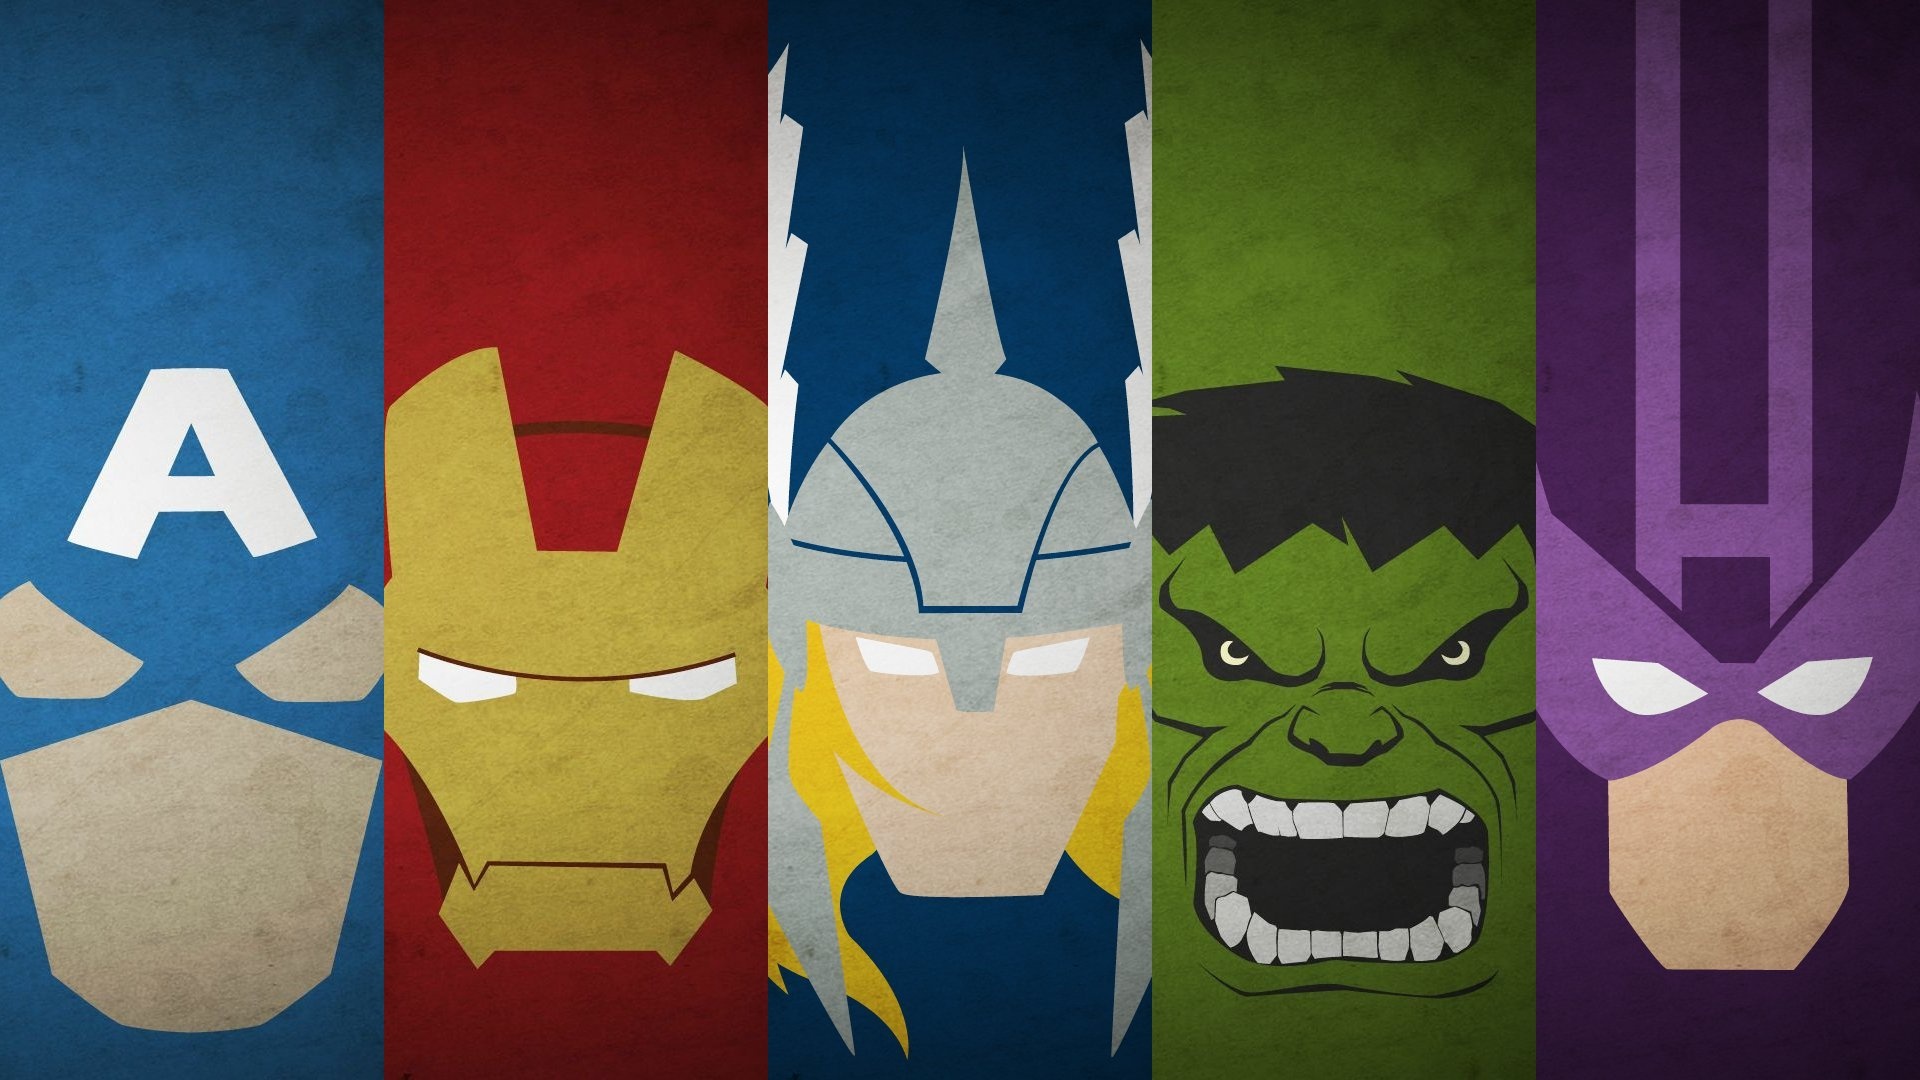 50 Minimalist HD Avengers Wallpapers to get you ready for Infinity War - deTeched 1920x1080